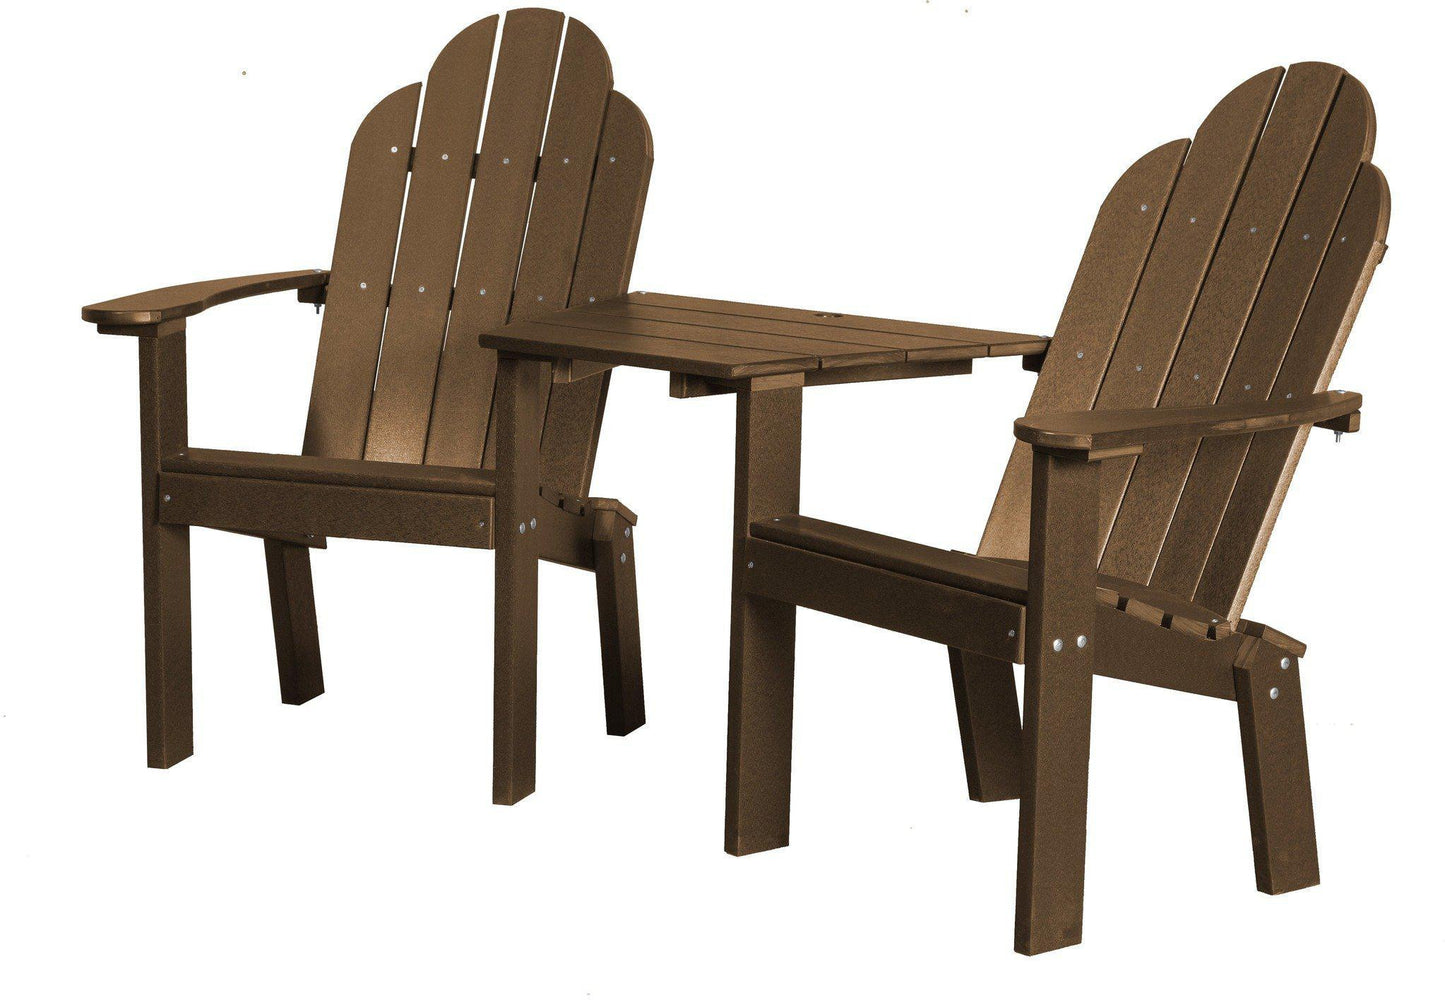 Wildridge Outdoor Recycled Plastic Classic Deck Chair Tete a Tete - LEAD TIME TO SHIP 4 WEEKS